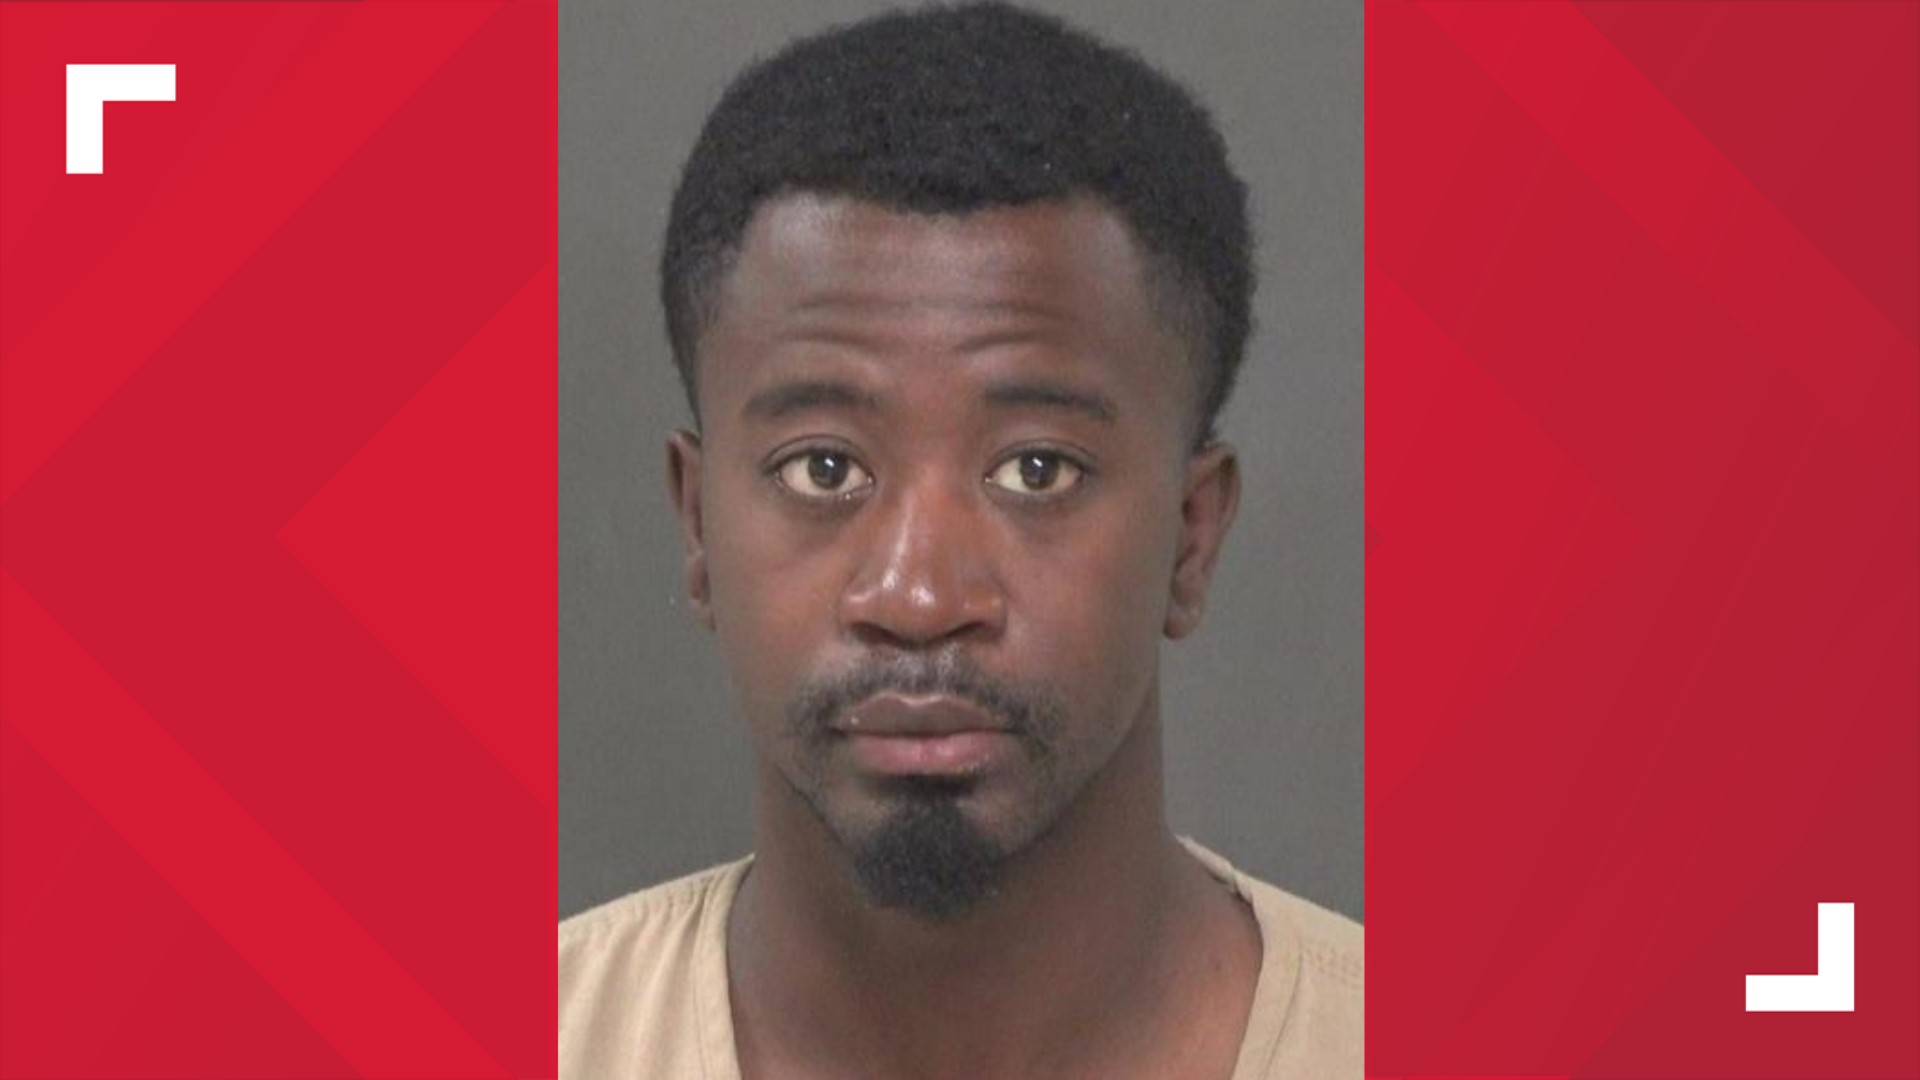 Franklin Grayson, 26, who is from Jacksonville, Florida, is charged with attempted murder and felonious assault, the prosecutor’s office says.